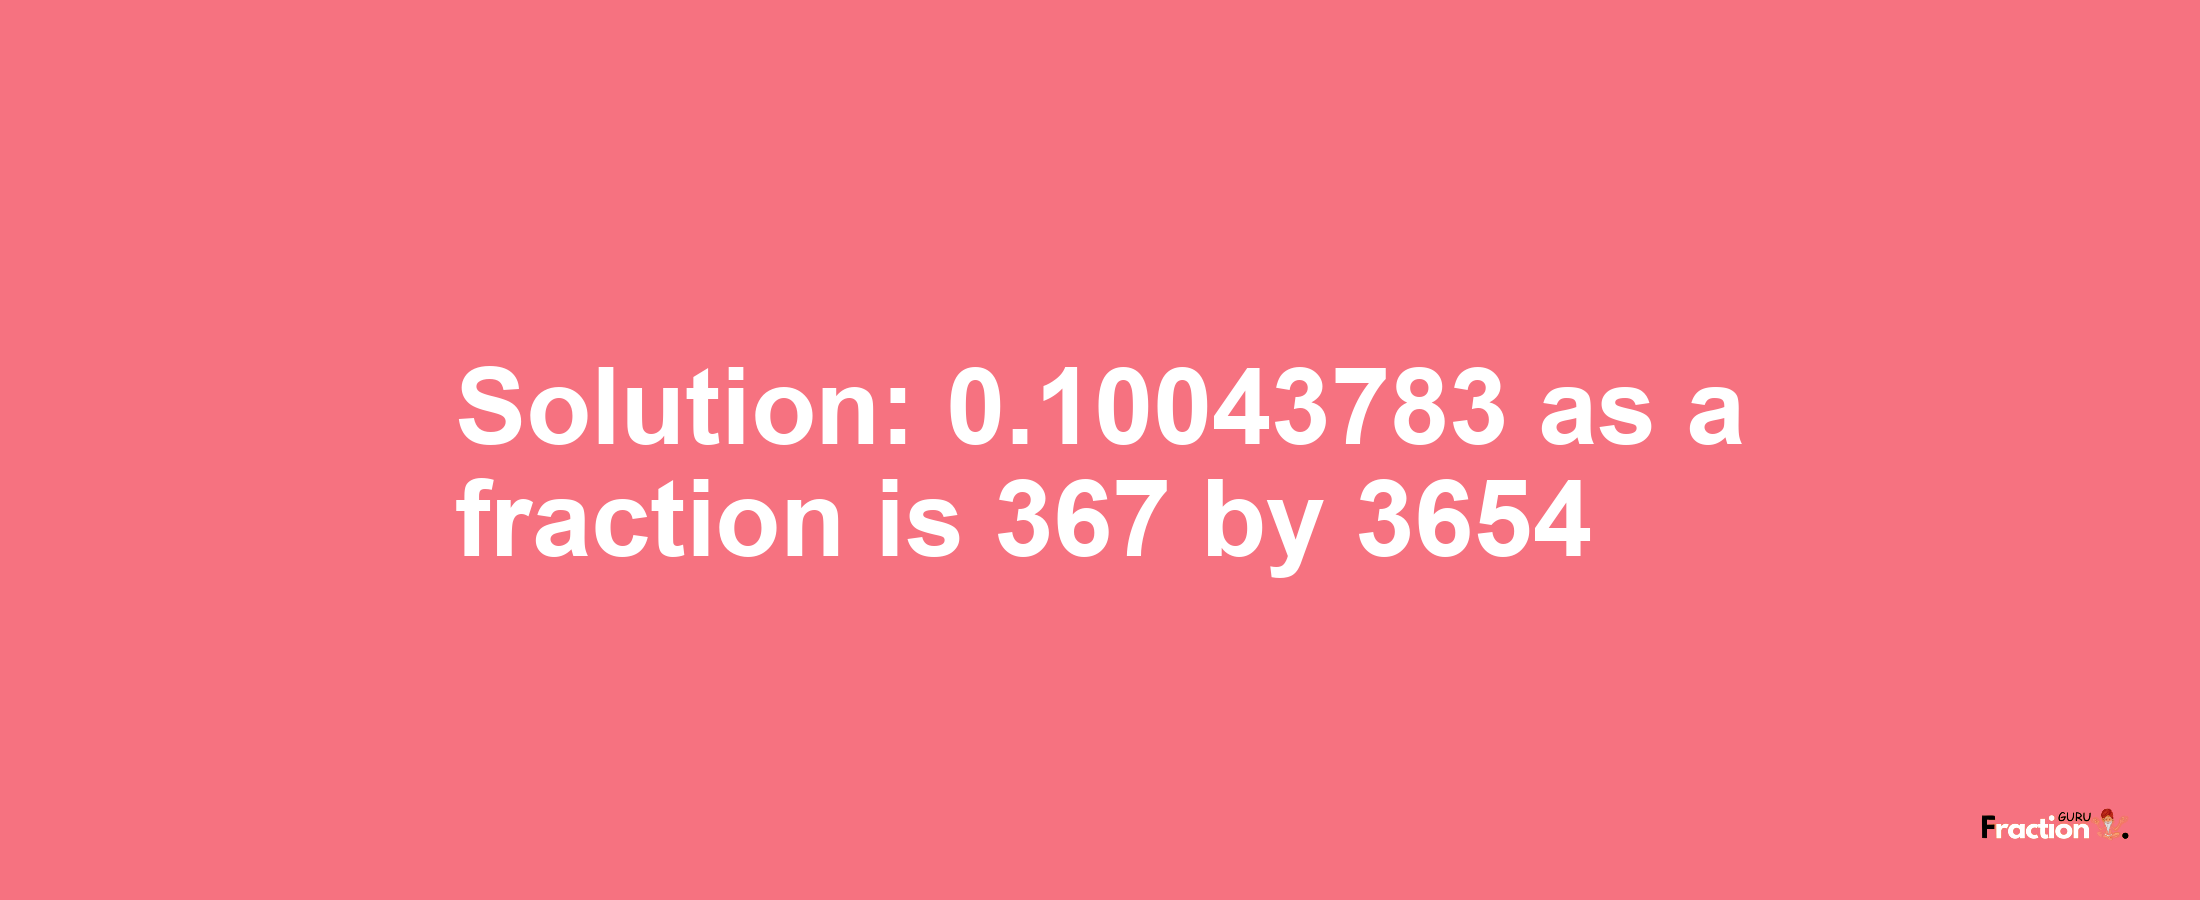 Solution:0.10043783 as a fraction is 367/3654